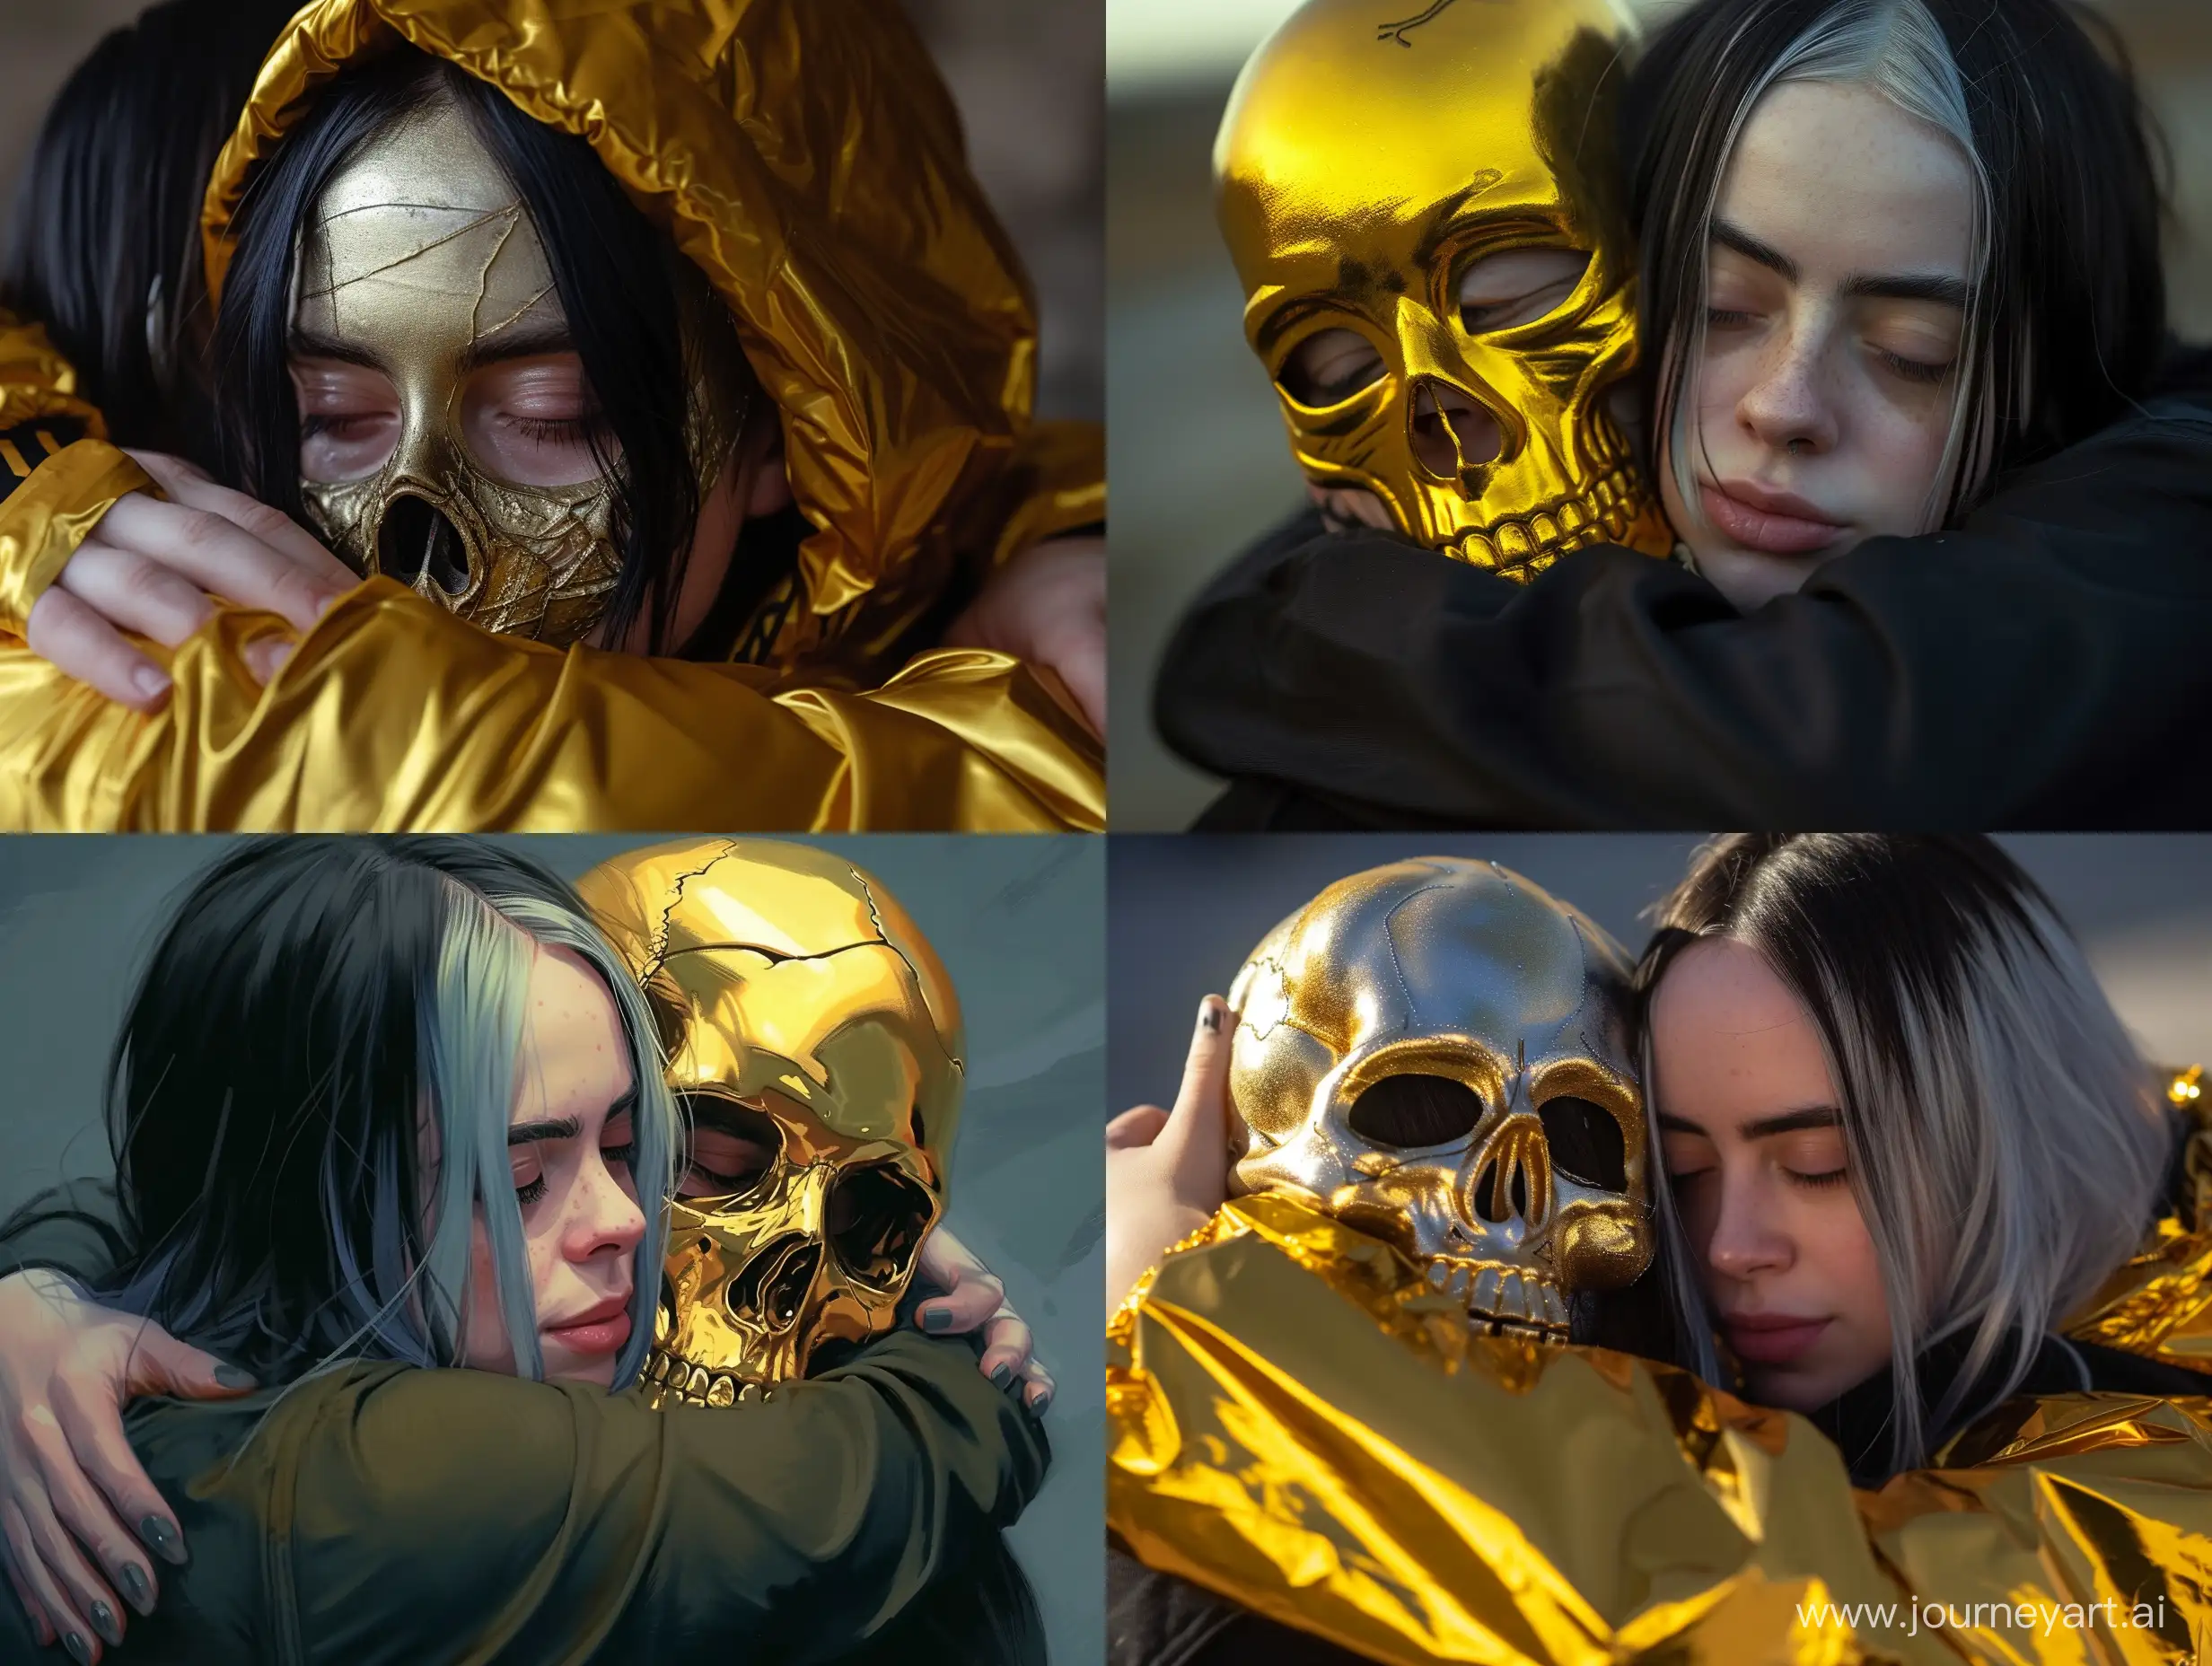 Billie-Eilish-Embraces-a-Mysterious-Figure-in-a-Golden-Skull-Mask